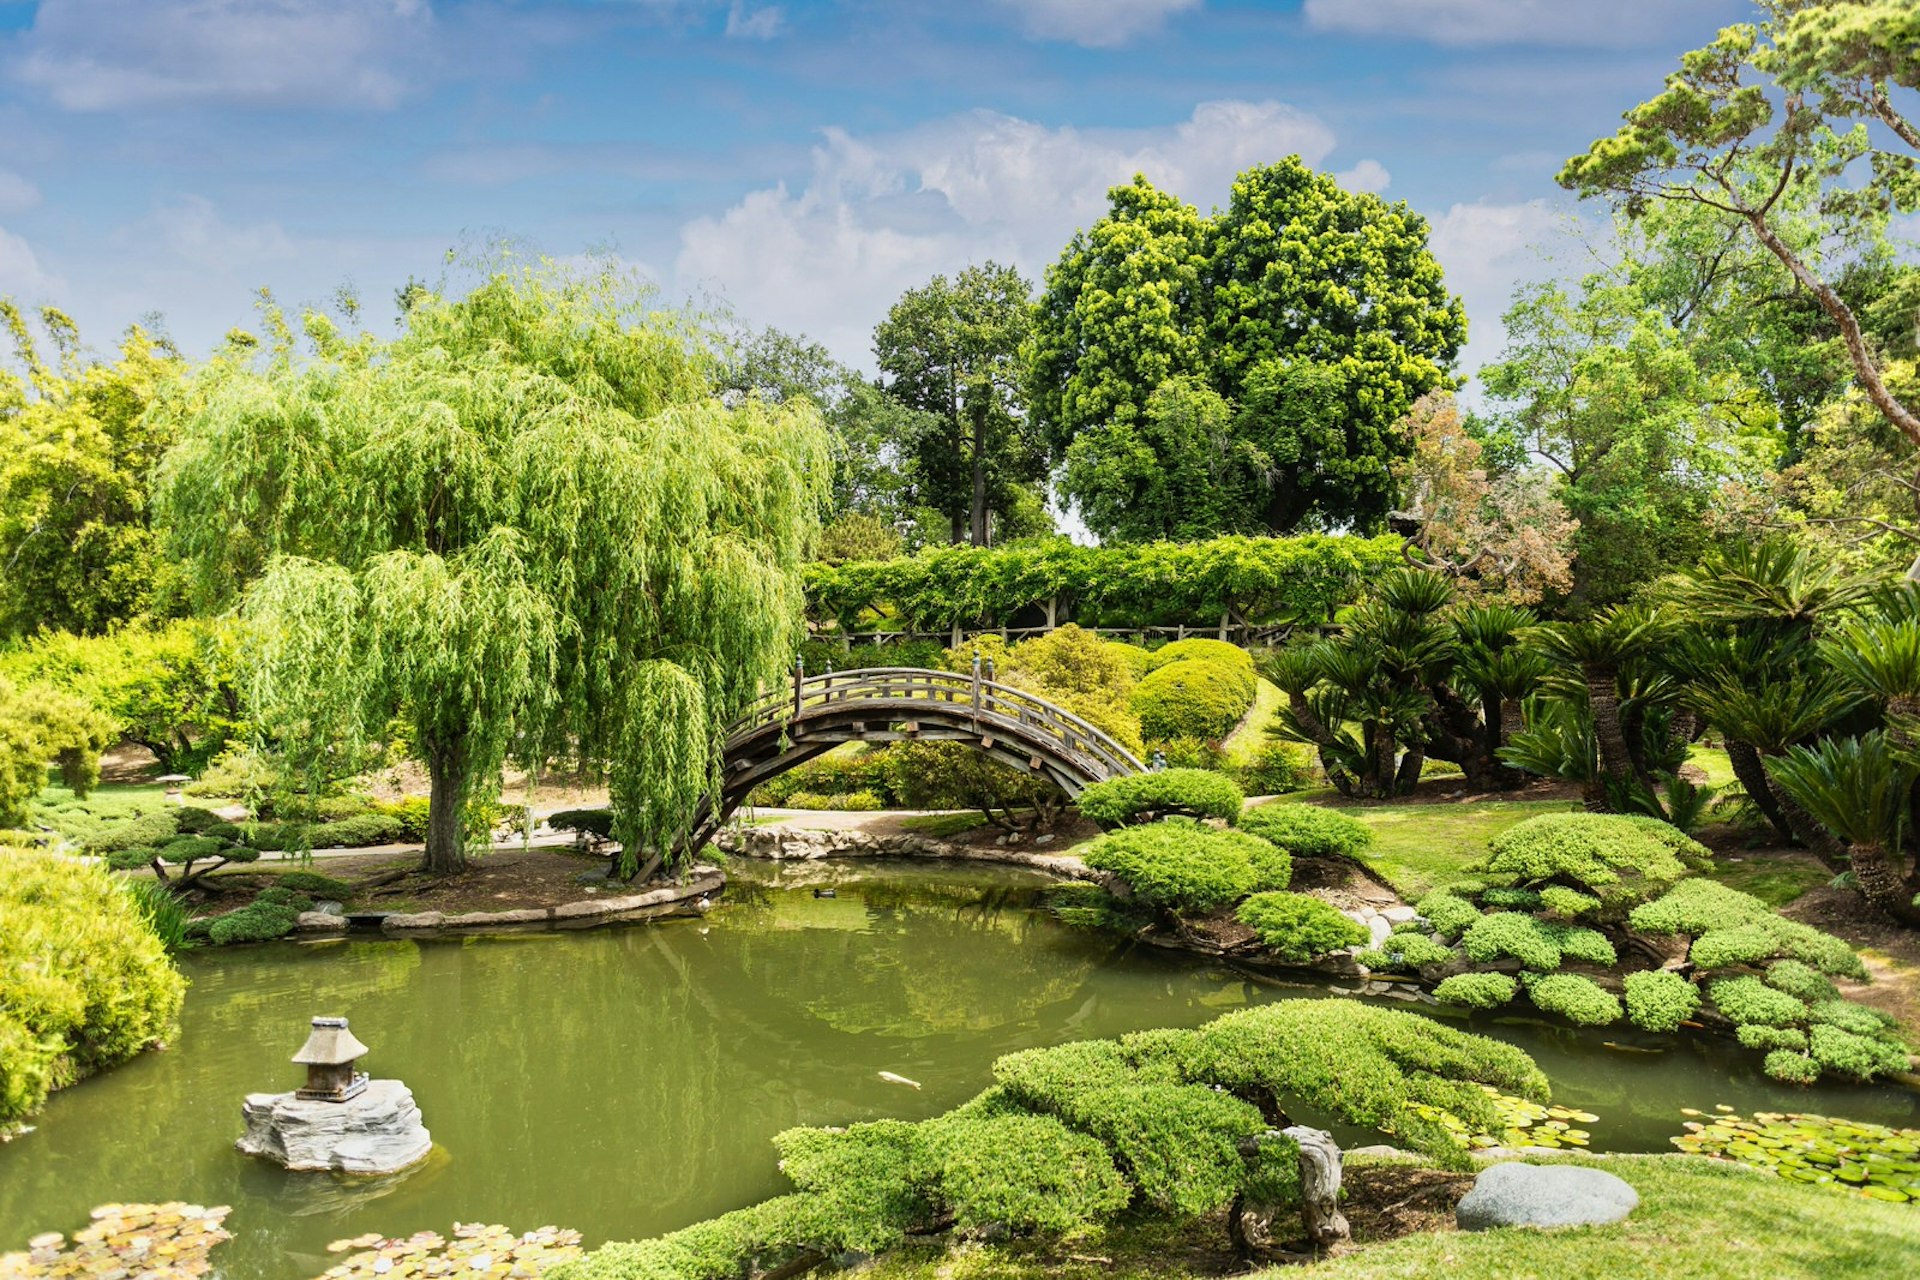 A semicircular bridge is reflected in a pool of green water, surrounded by weeping willows and bright green bushes.